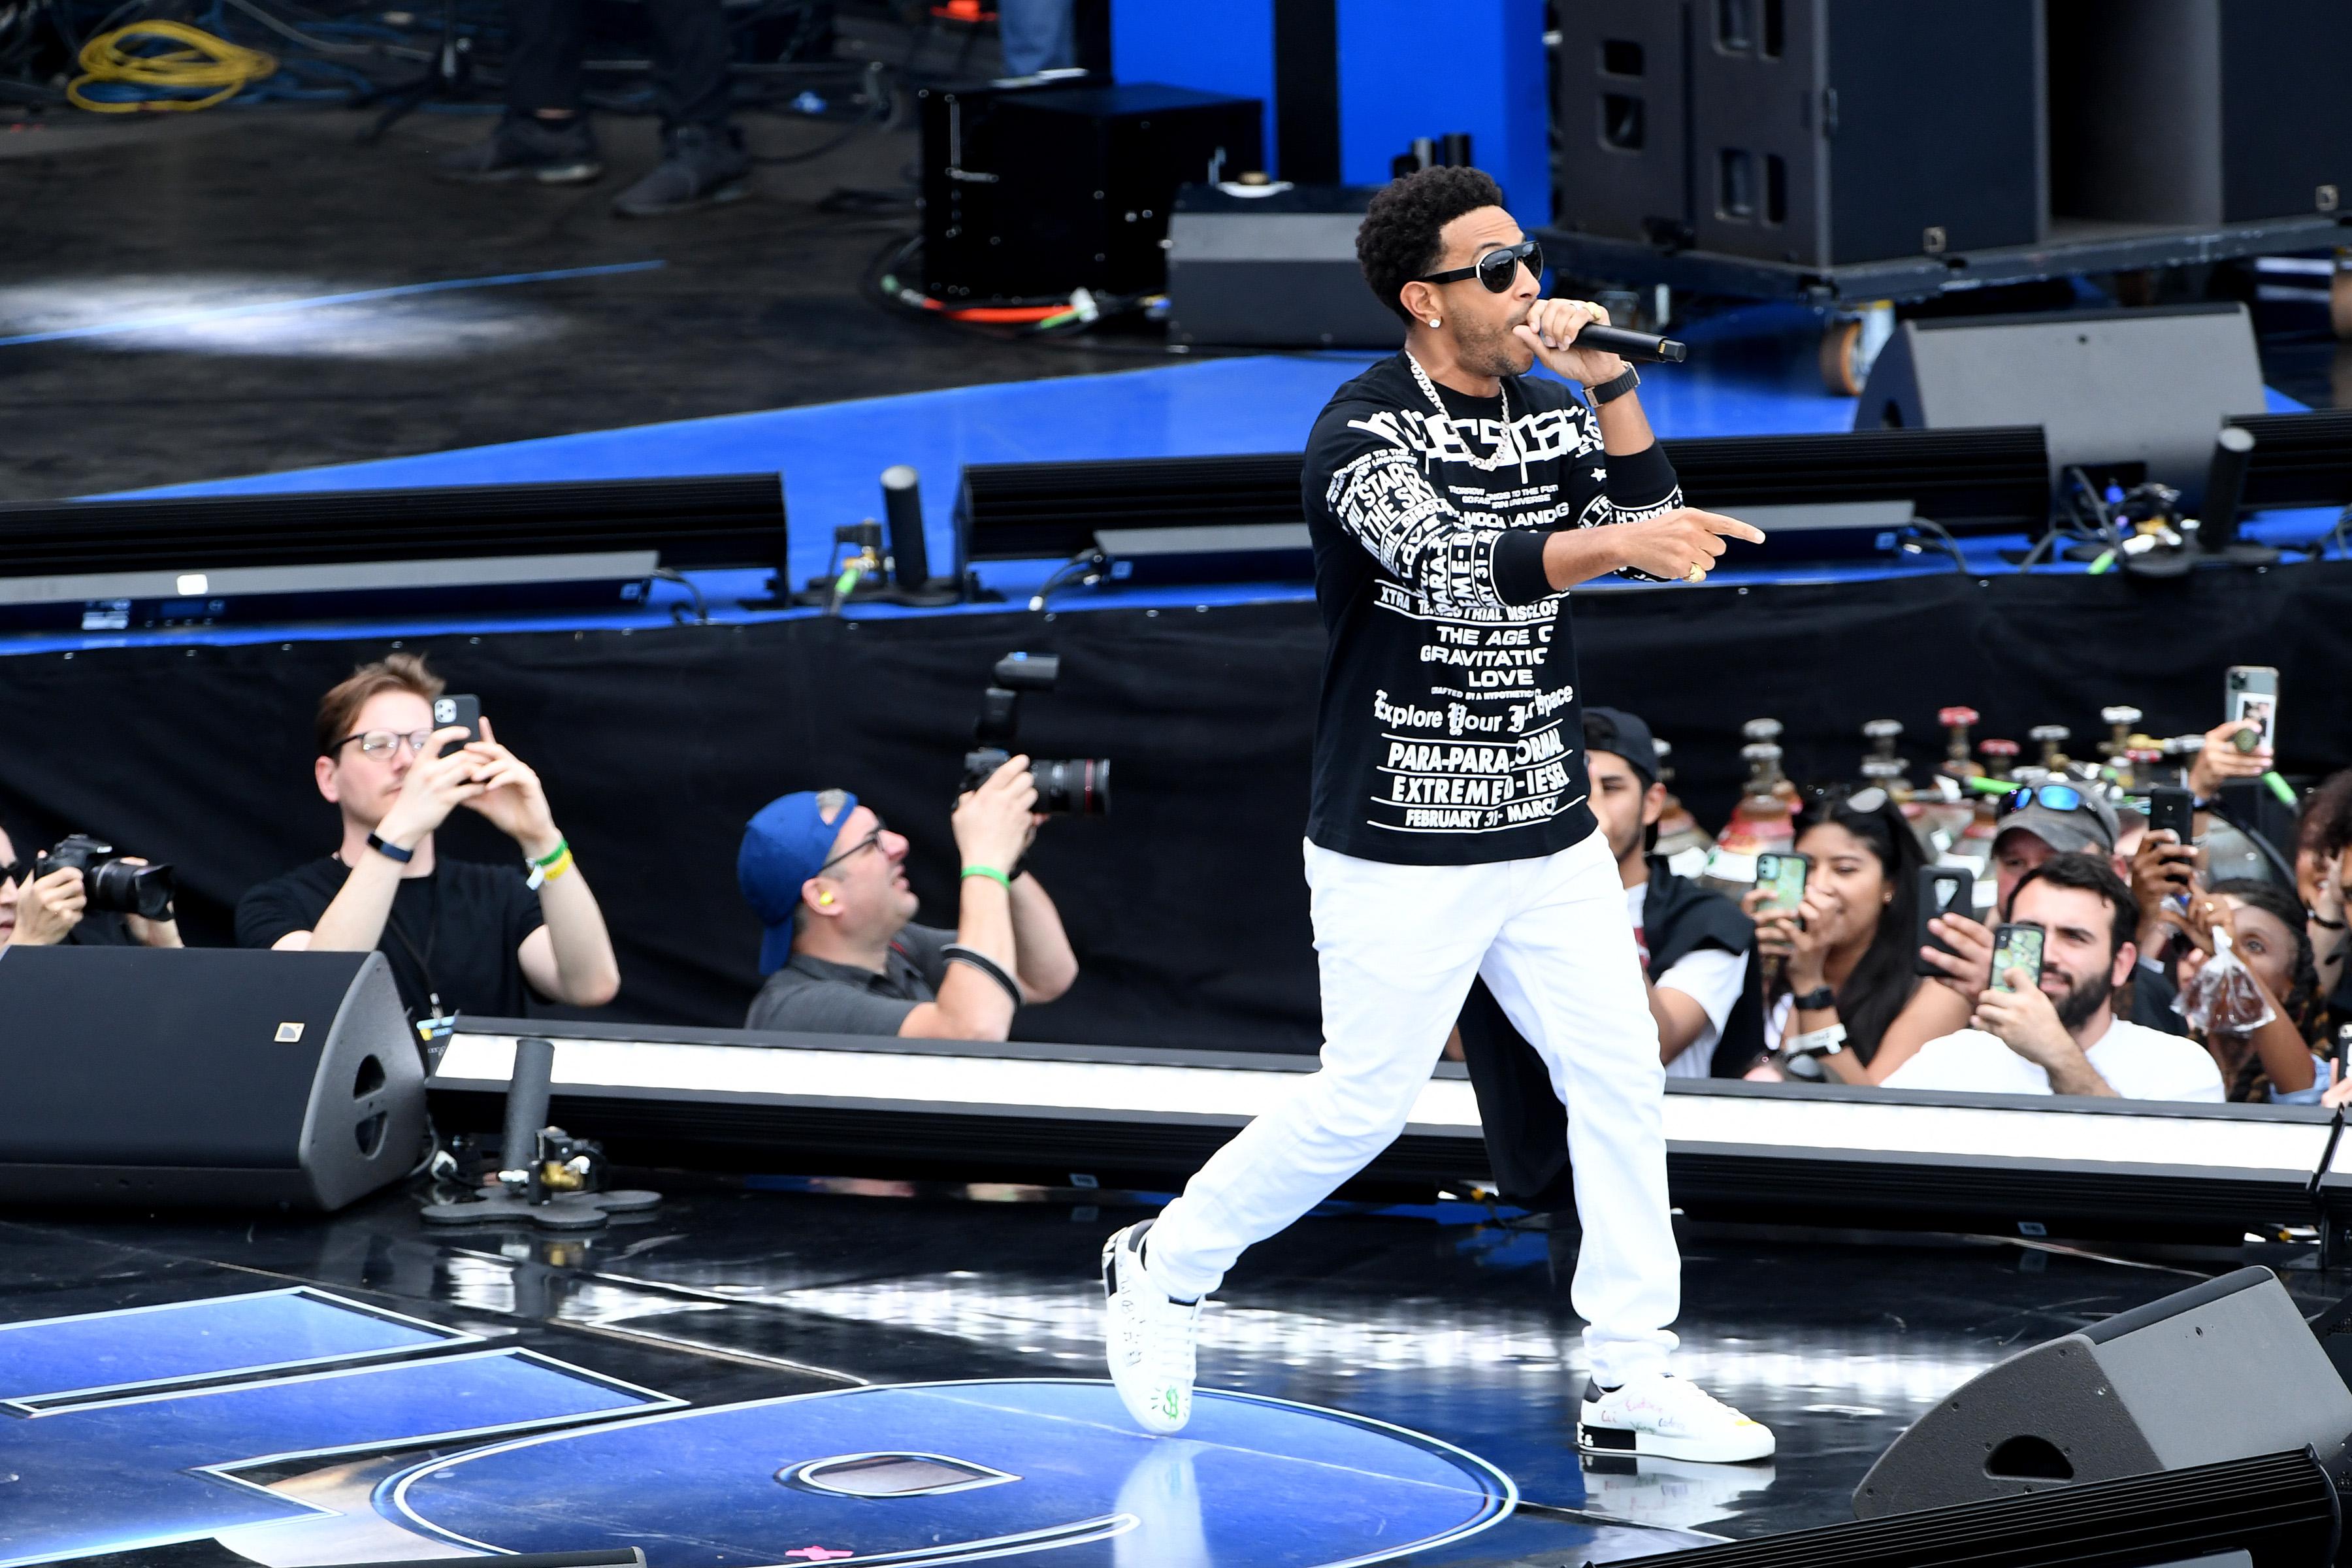 Ludacris holds a mic onstage as fans below him film with their phones